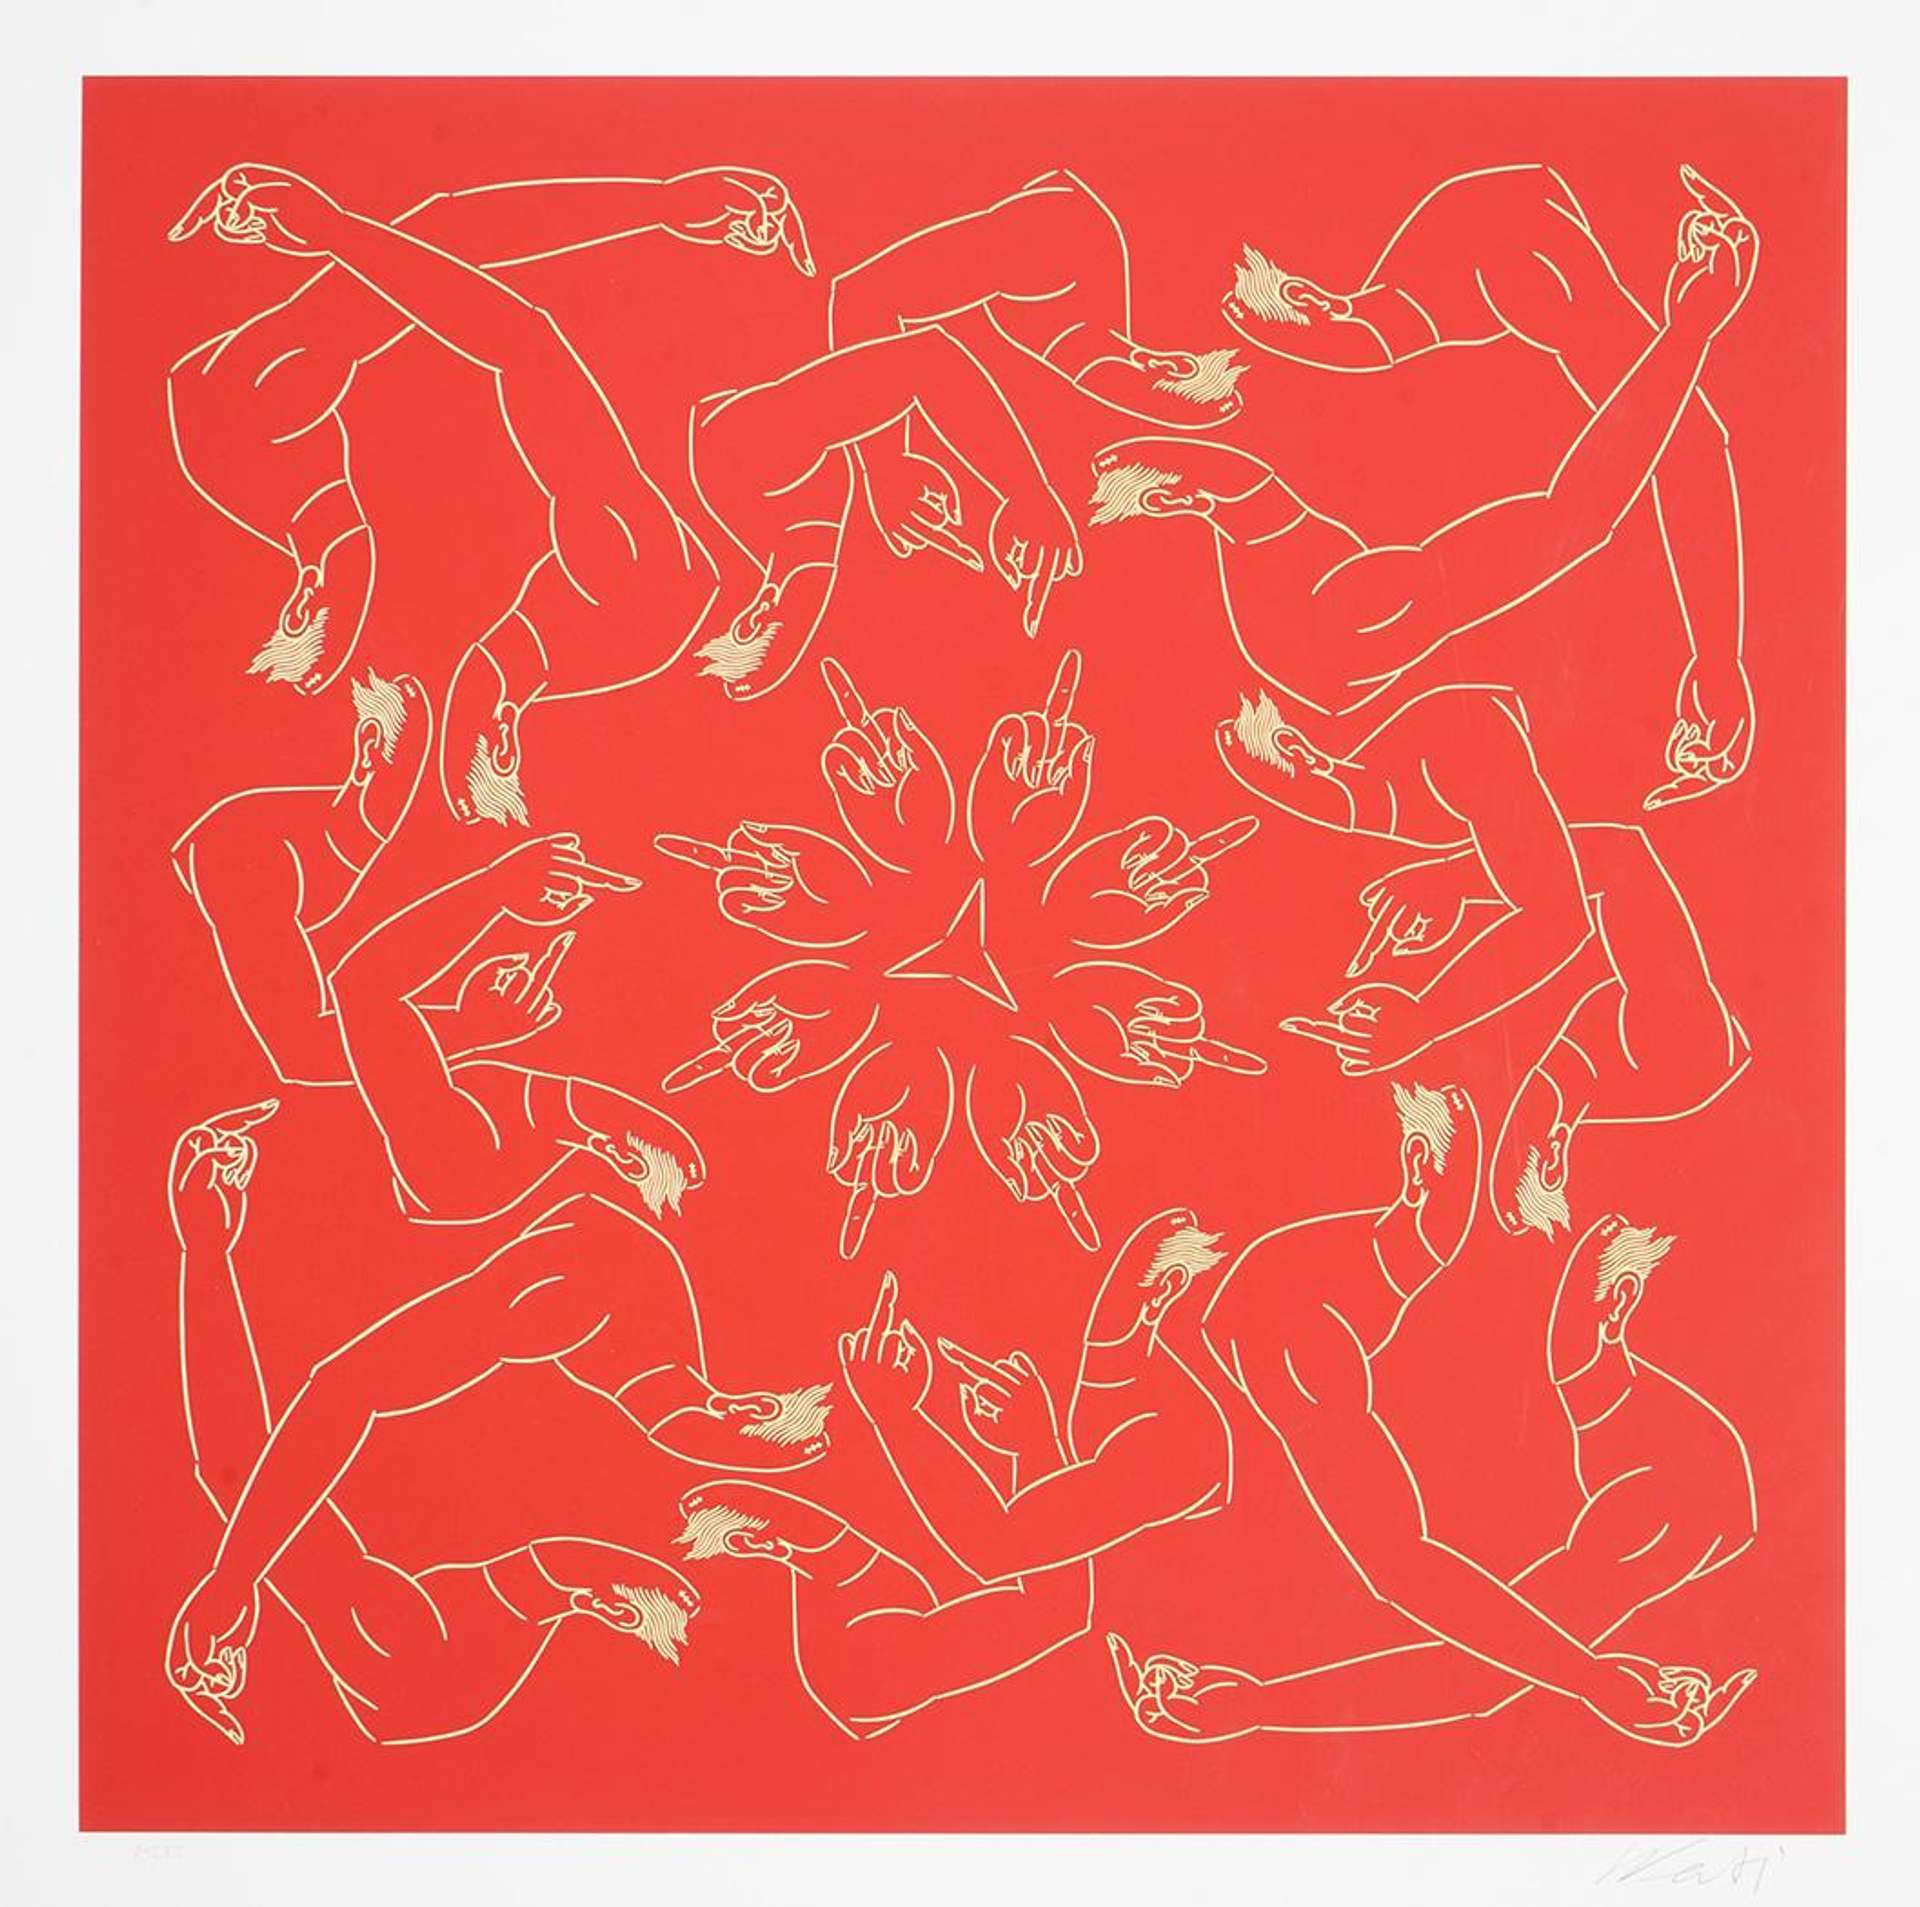 Ai Weiwei’s Middle Finger In Red. A screenprint of a pattern of arms holding up the middle finger against a red background